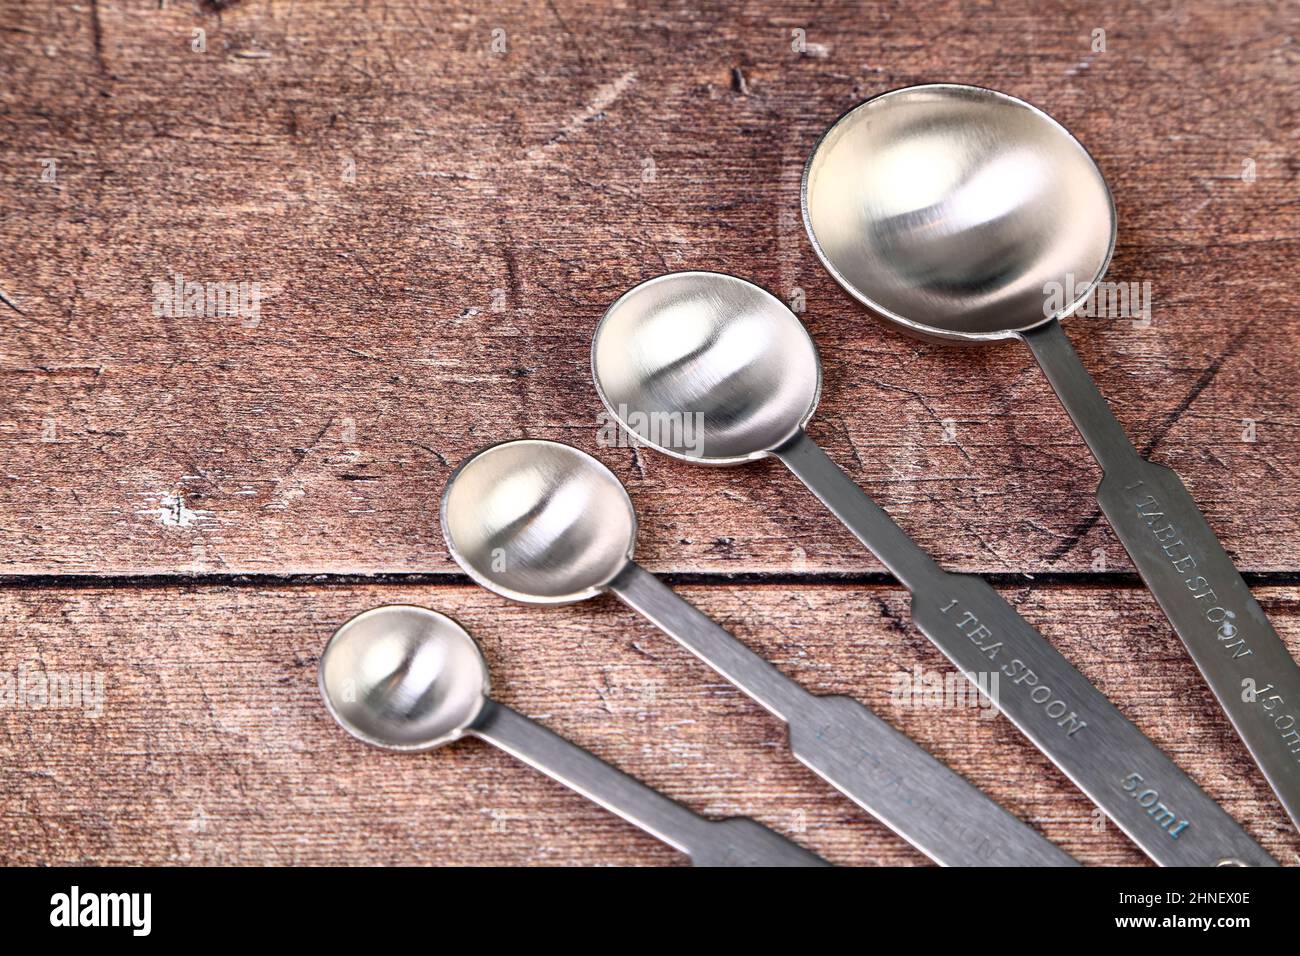 https://c8.alamy.com/comp/2HNEX0E/wooden-kitchen-table-with-a-set-of-stainless-steel-measuring-spoons-baking-concept-2HNEX0E.jpg